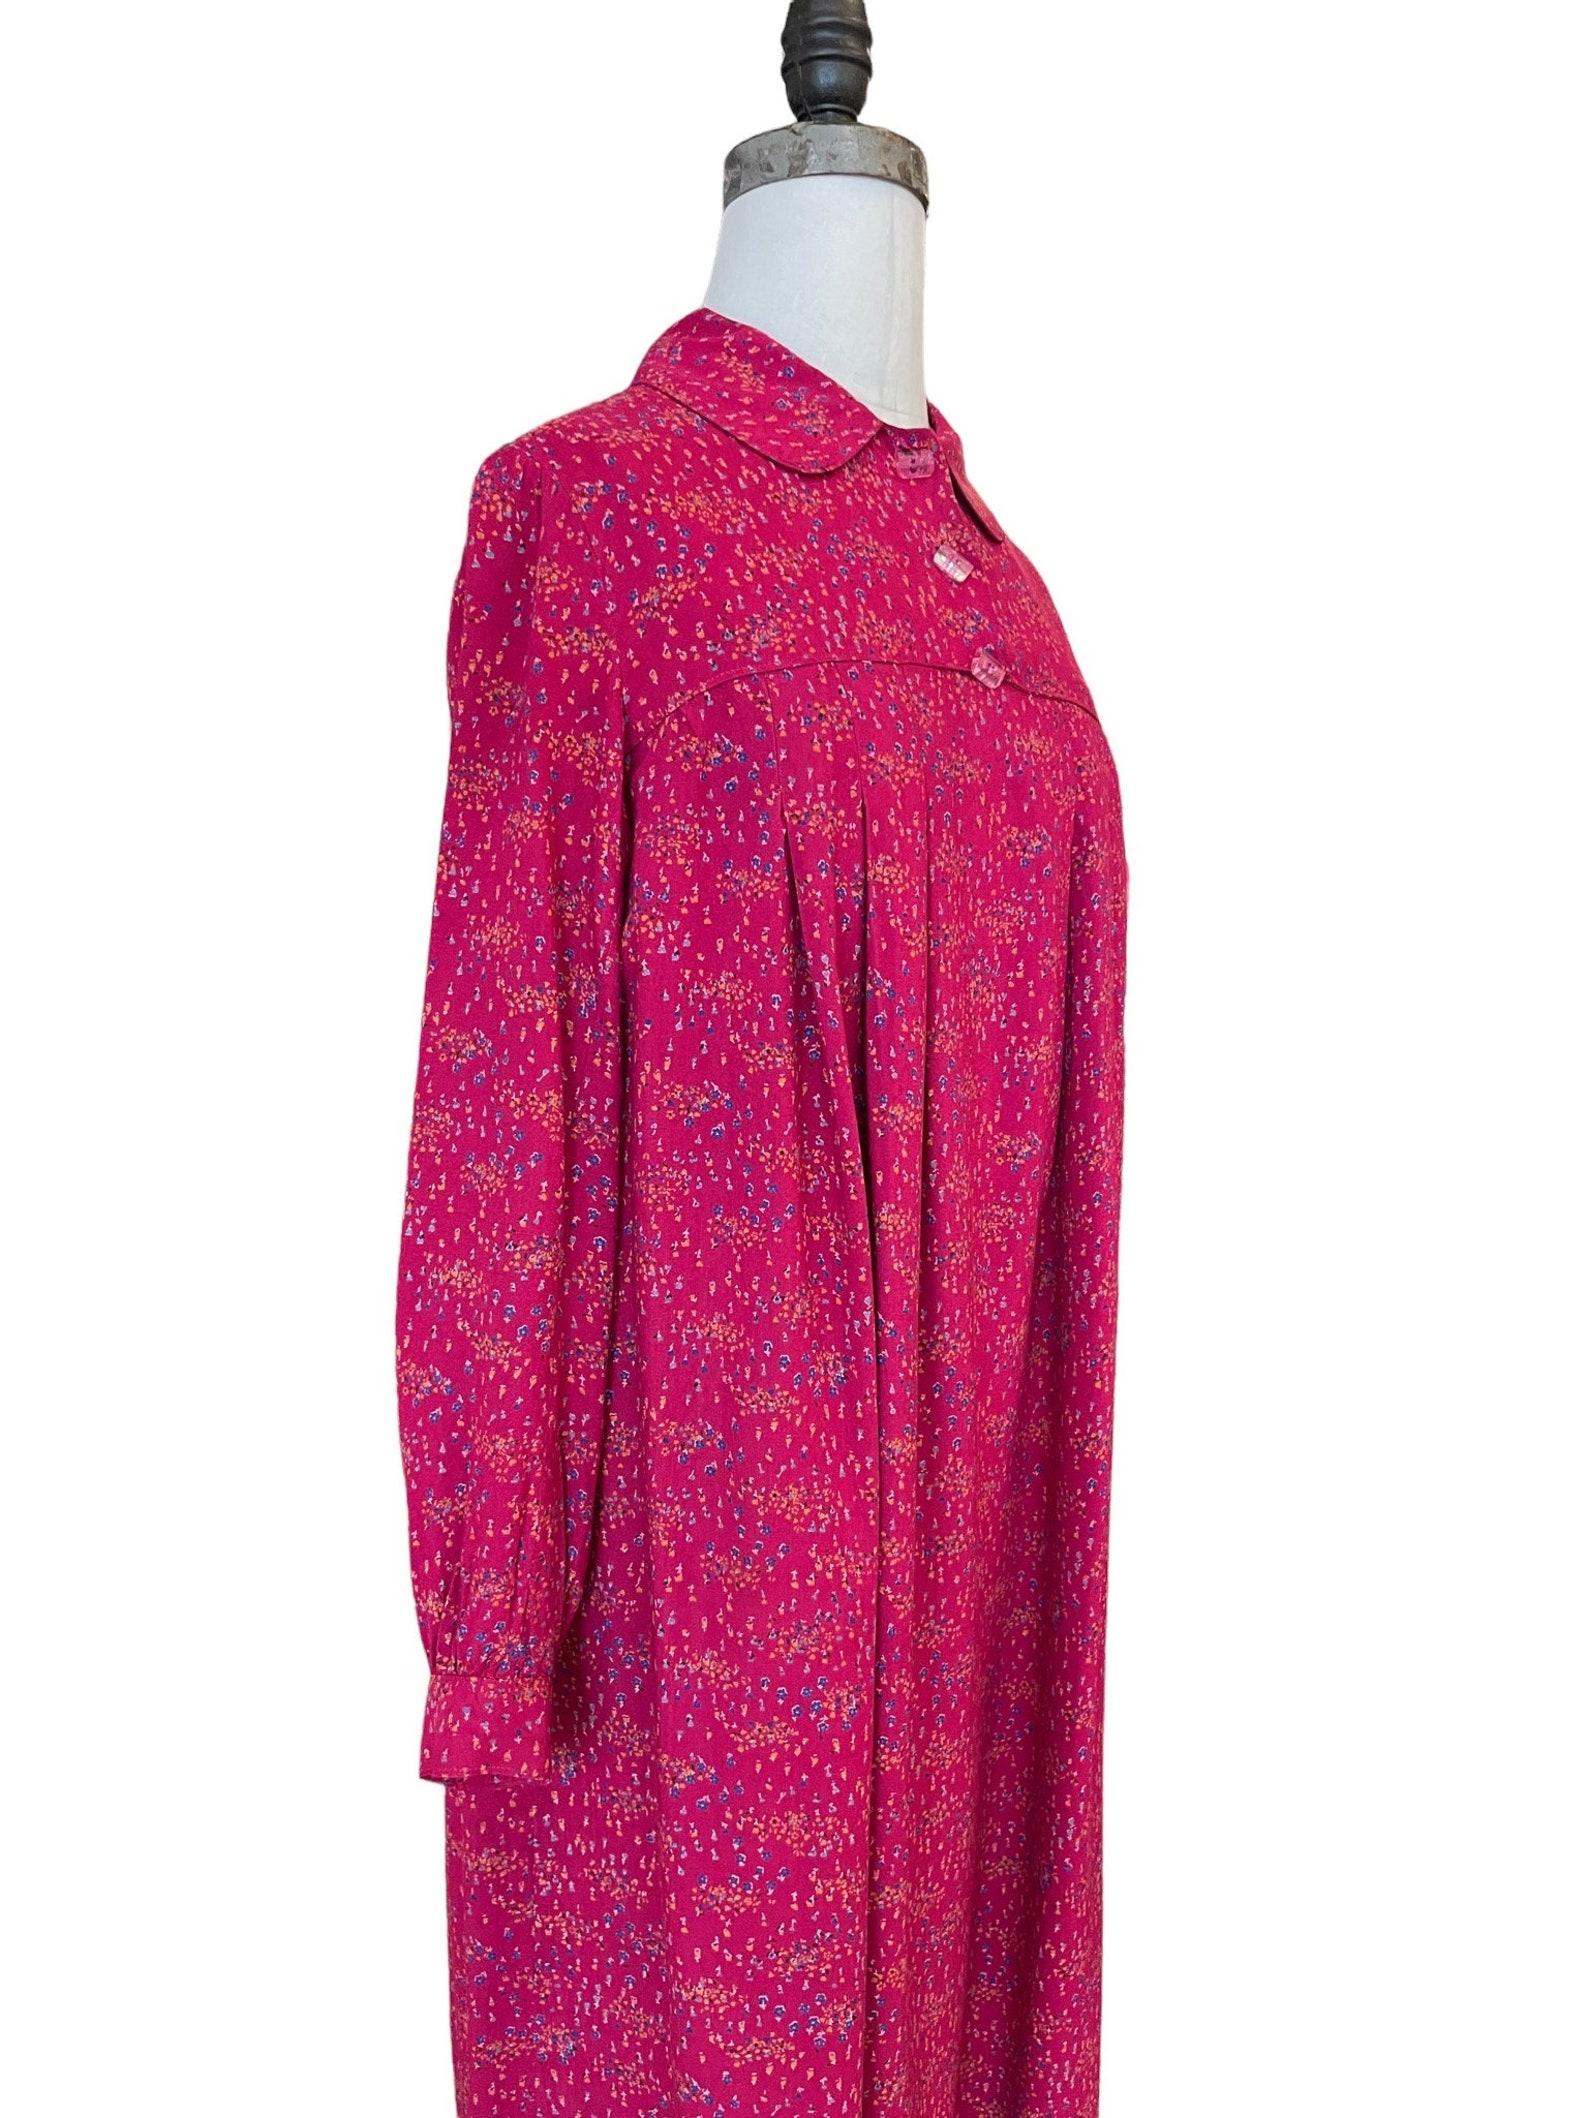 Raspberry Pink Floral Trapeze Dress, Circa 1970s For Sale 1